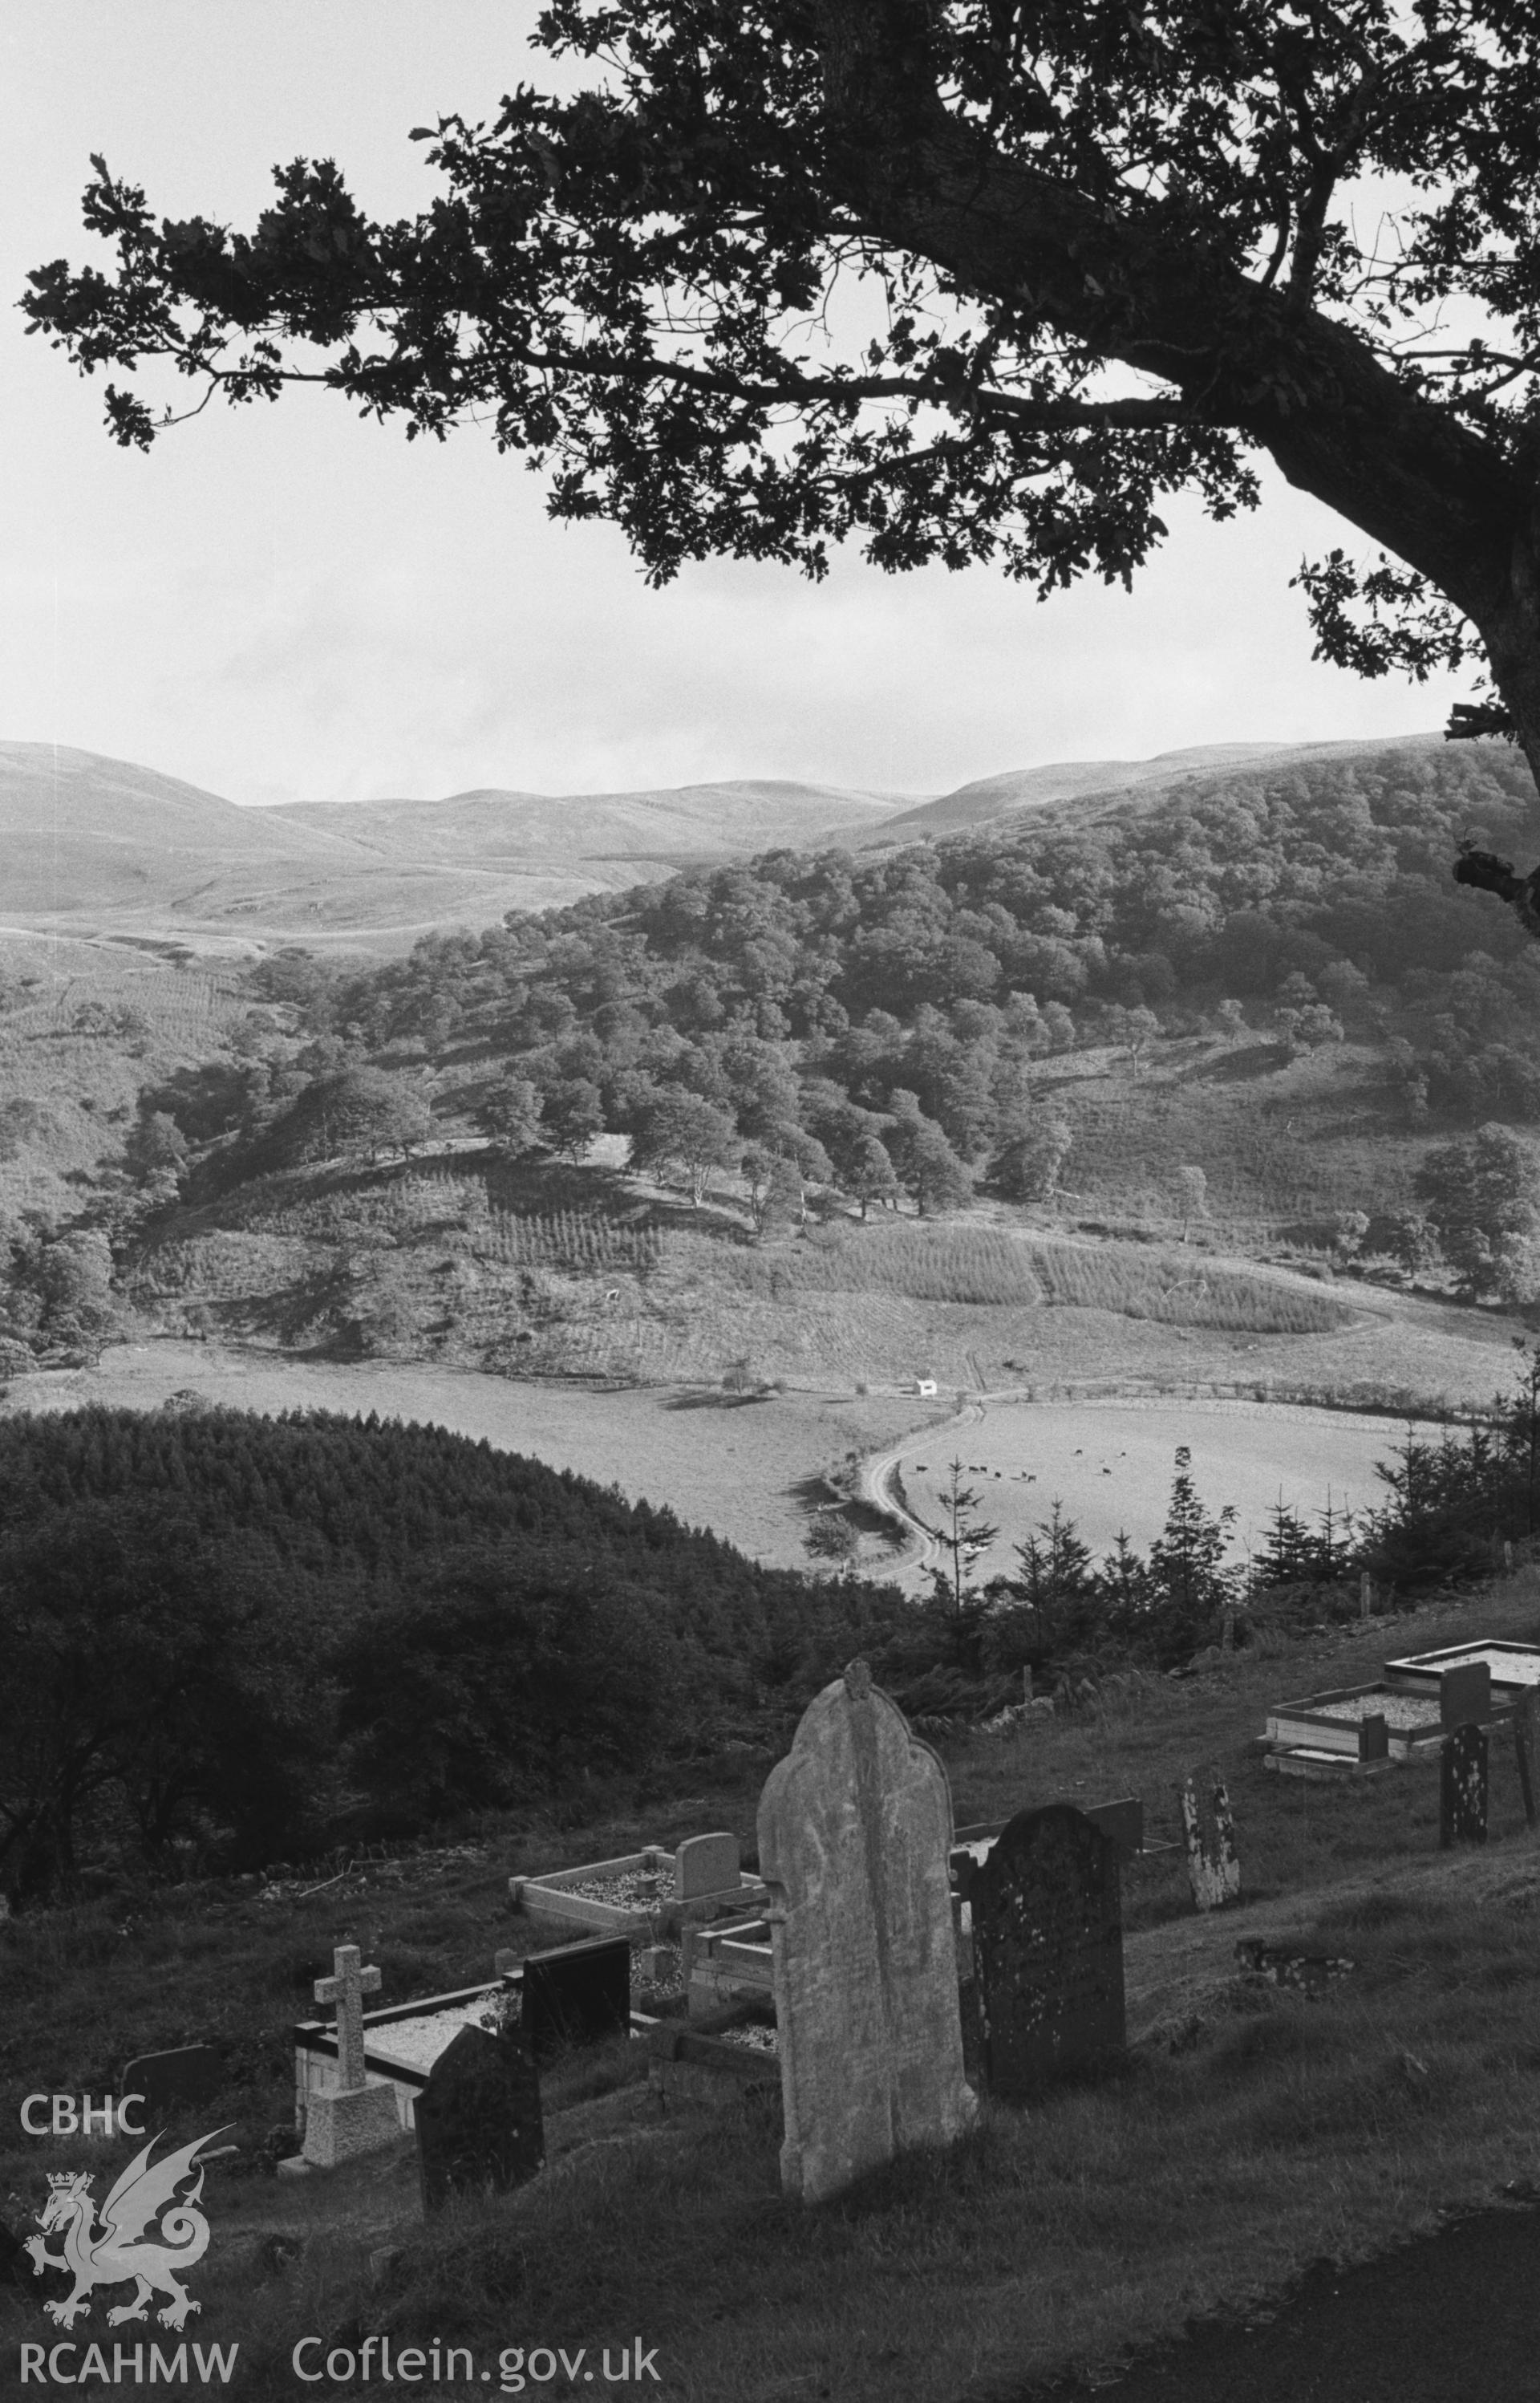 Digital copy of a black and white negative showing view from Hafod Uchtryd church, Eglwys Newydd, to Pant Melyn, with Nant Gam on the left. Photographed in September 1963 by Arthur O. Chater from Grid Reference SN 7688 7369, looking south south east.